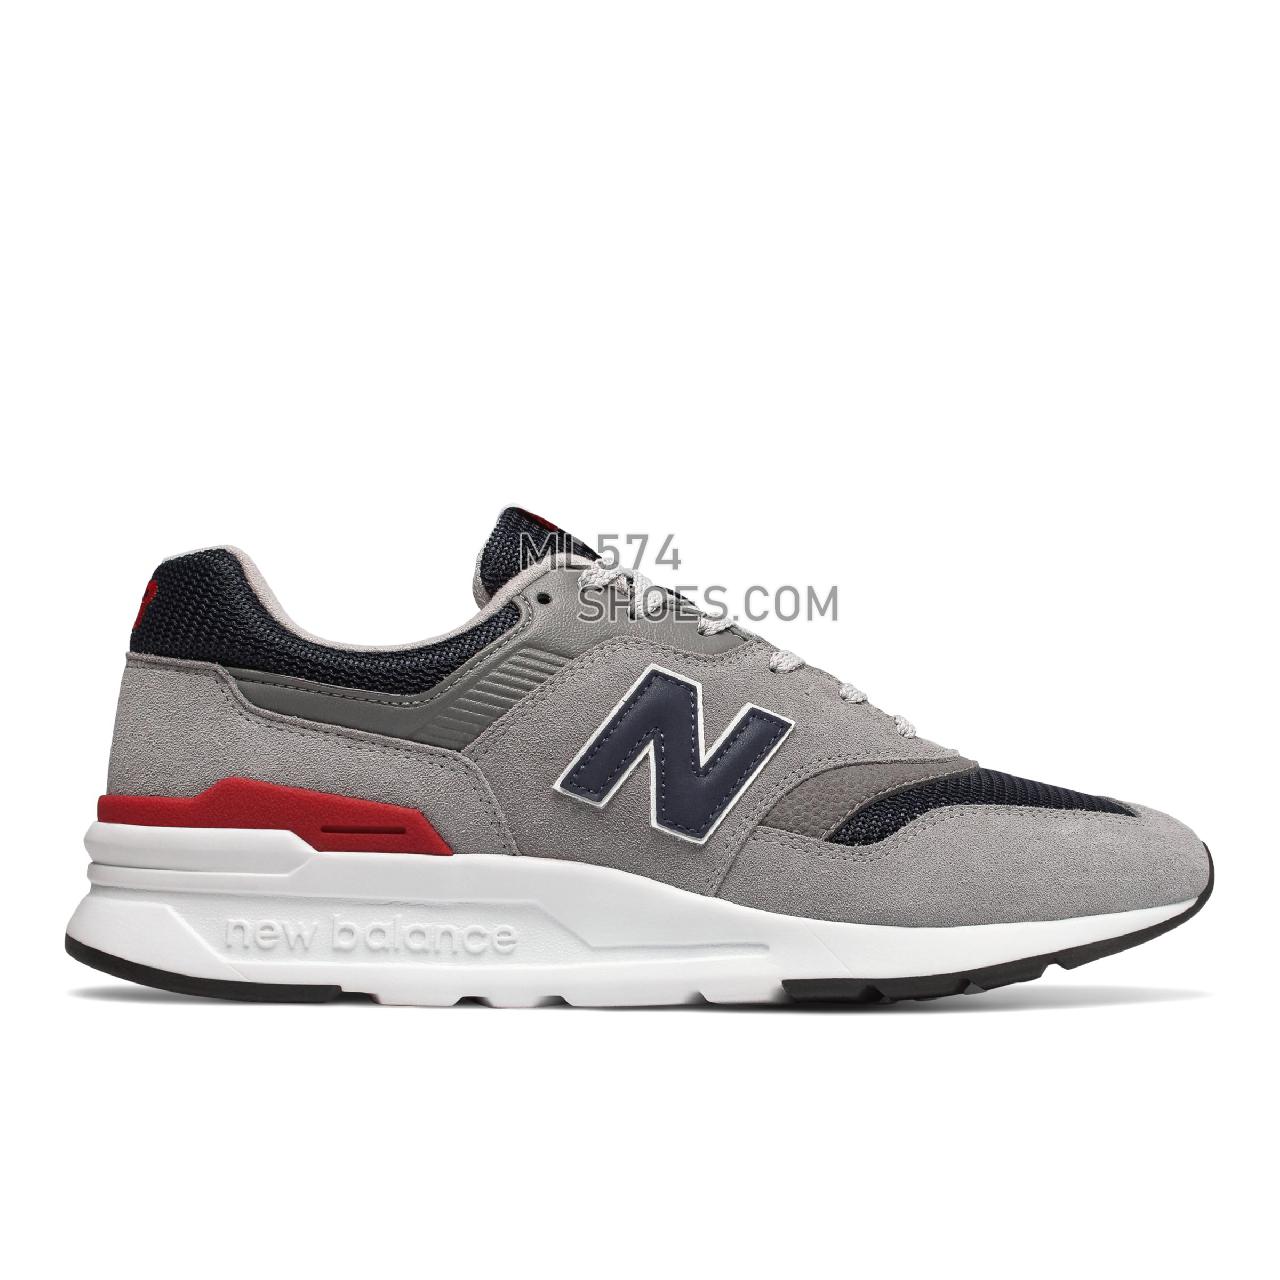 New Balance 997H - Men's Sport Style Sneakers - Team Away Grey with Pigment - CM997HCJ